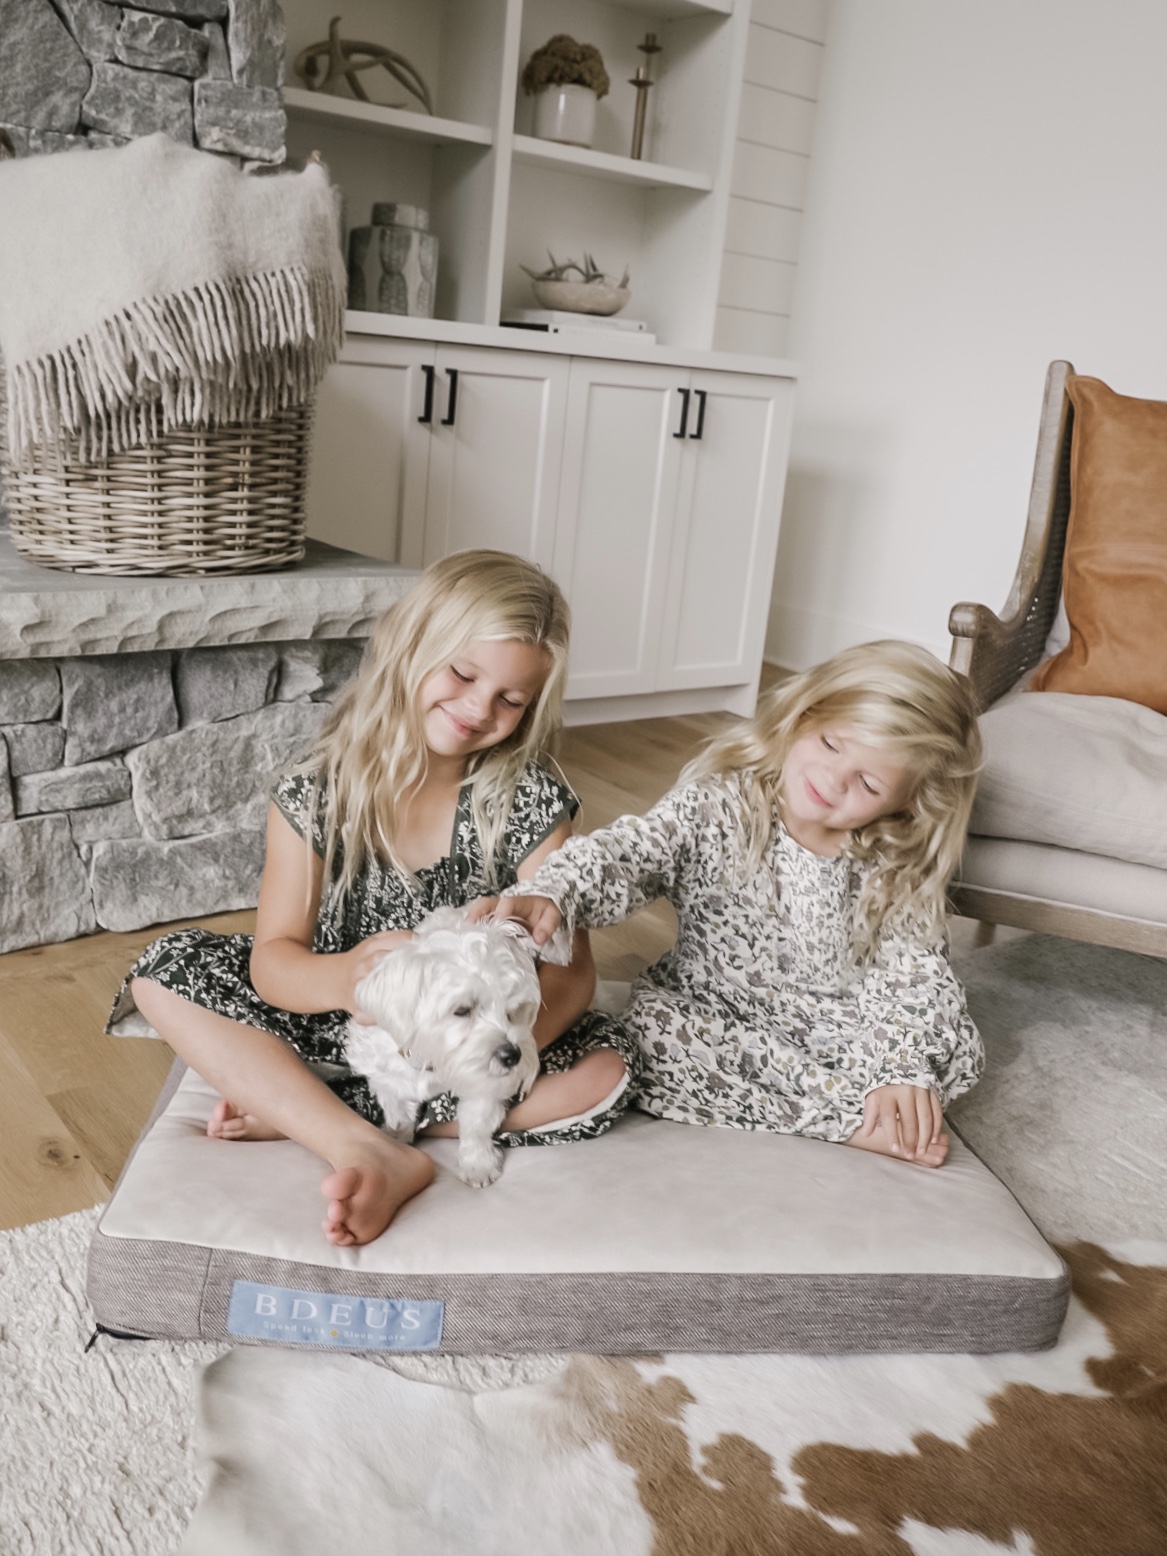 BDEUS Cooling Dog bed is great for kids and dogs